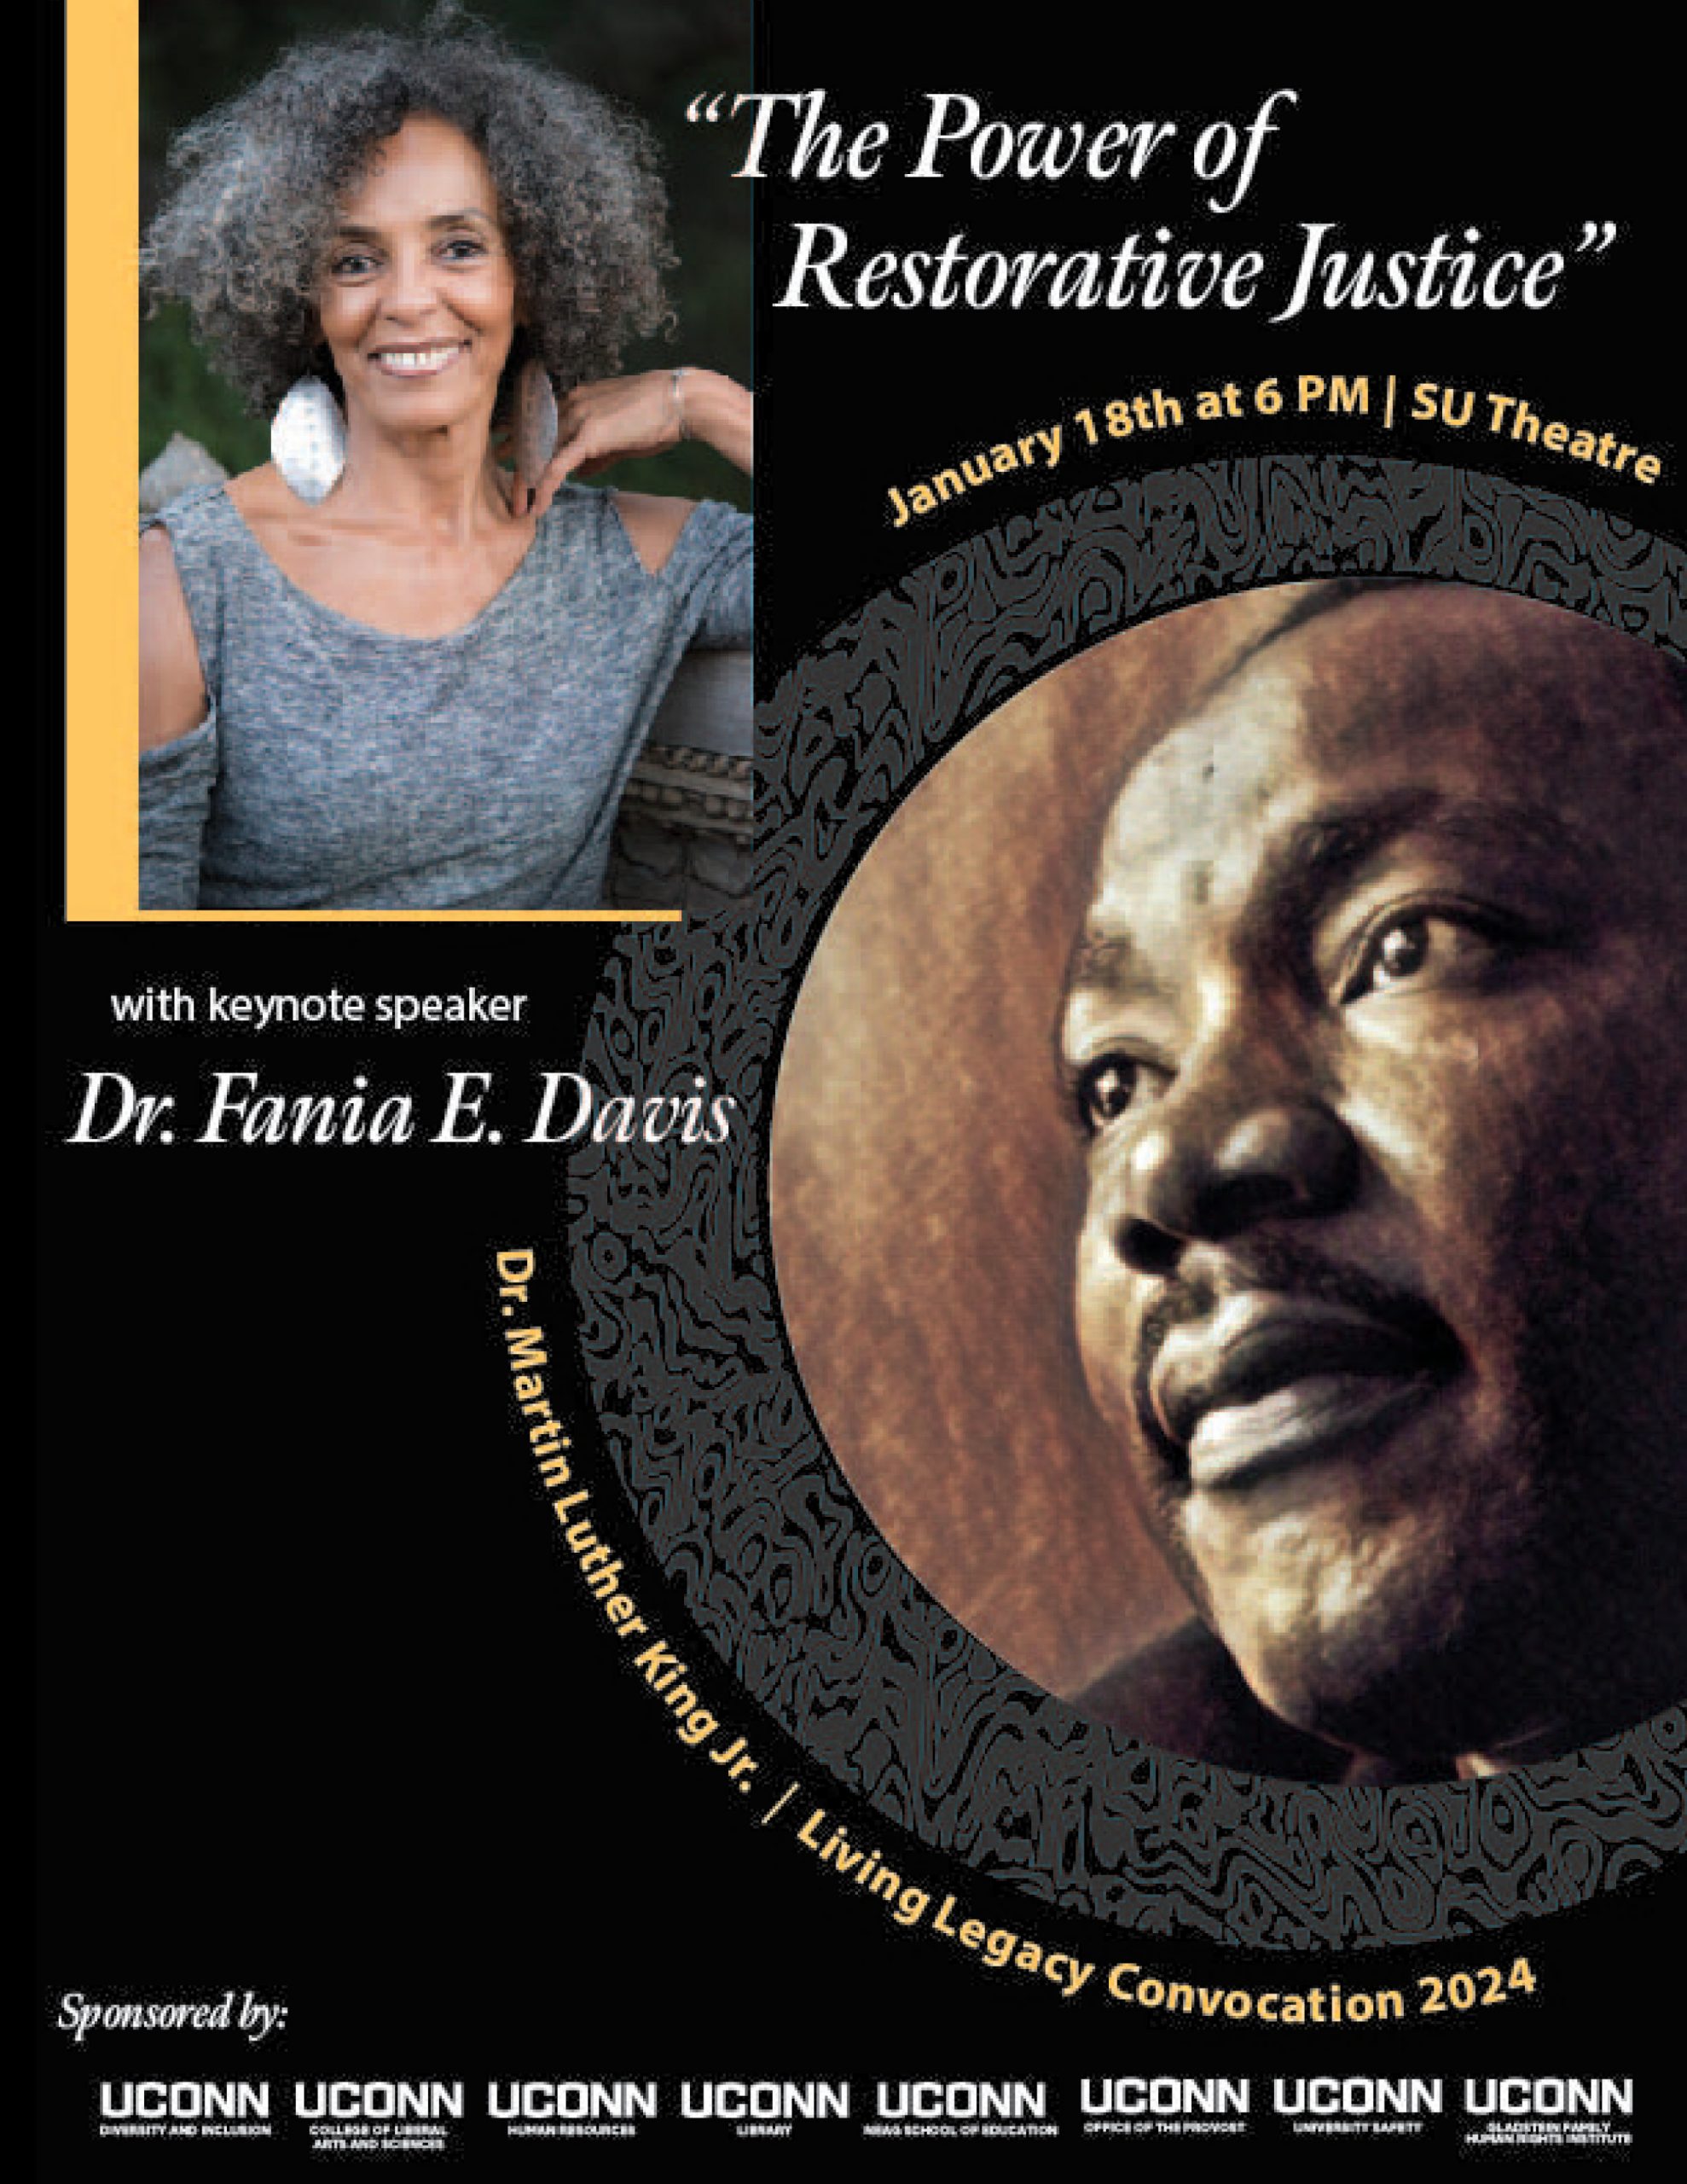 The Power of Restorative Justice